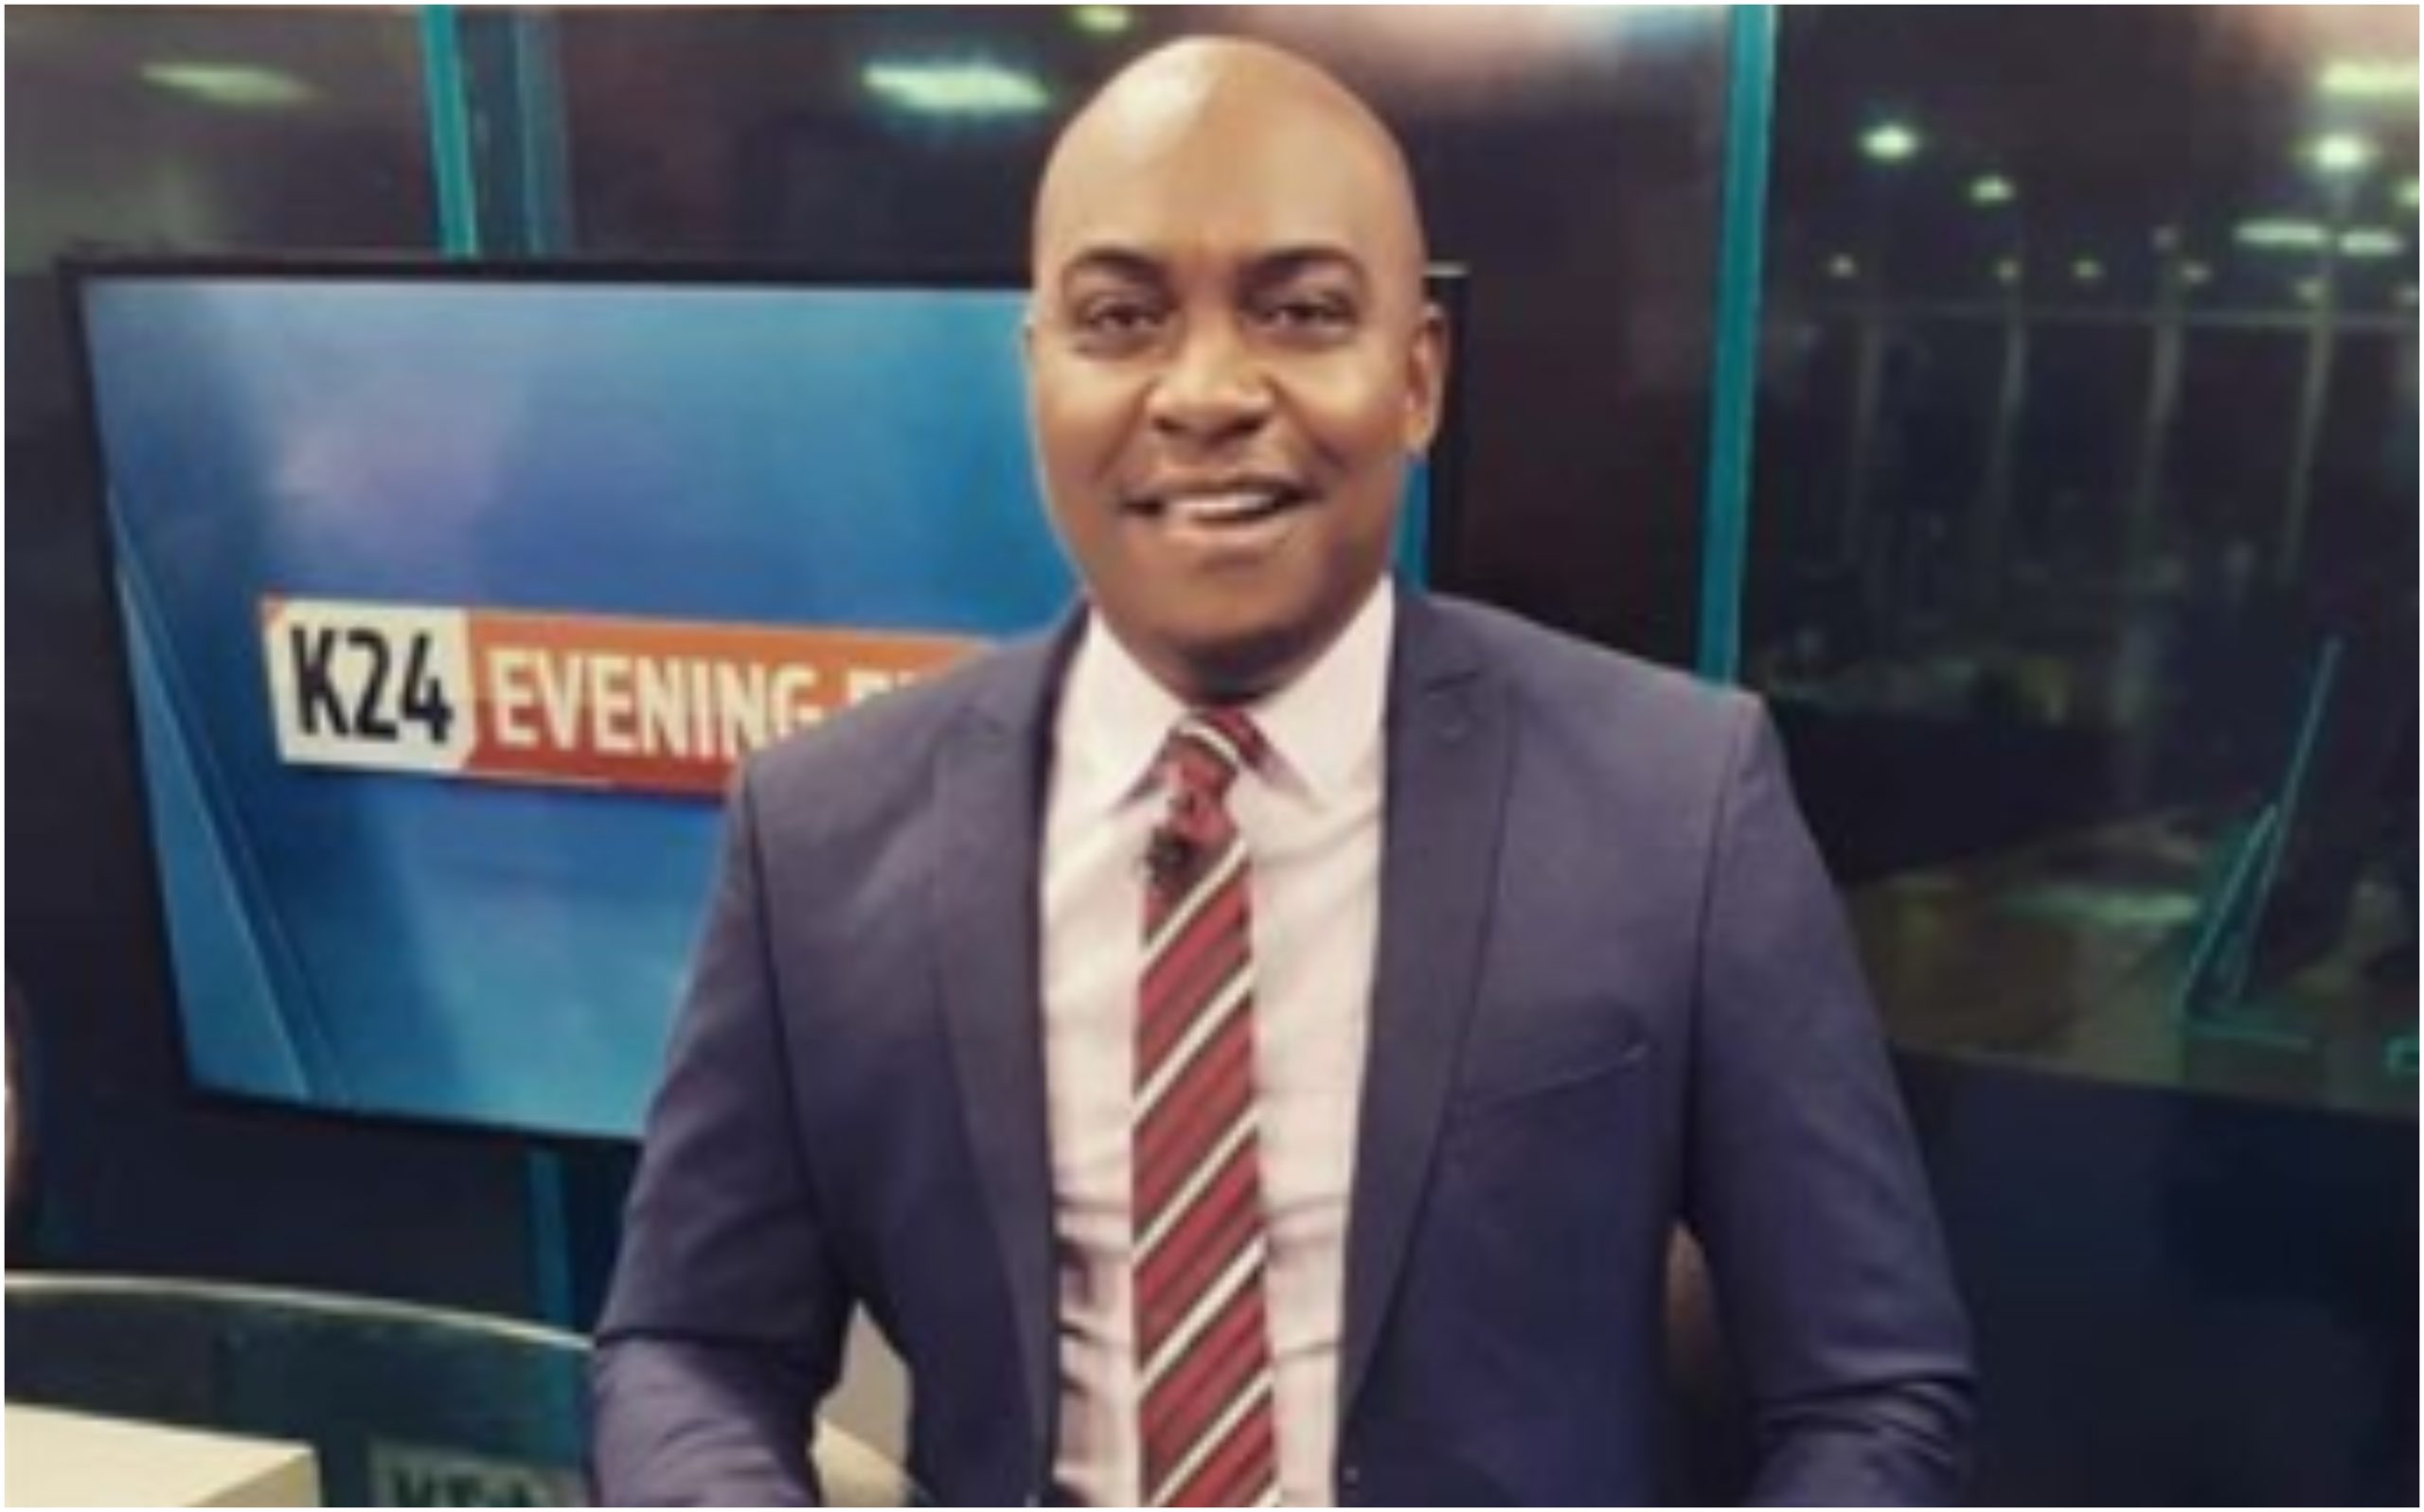 “I will not apologize for the truth!” K24´s Eric Njoka declares as the station´s woes deepen